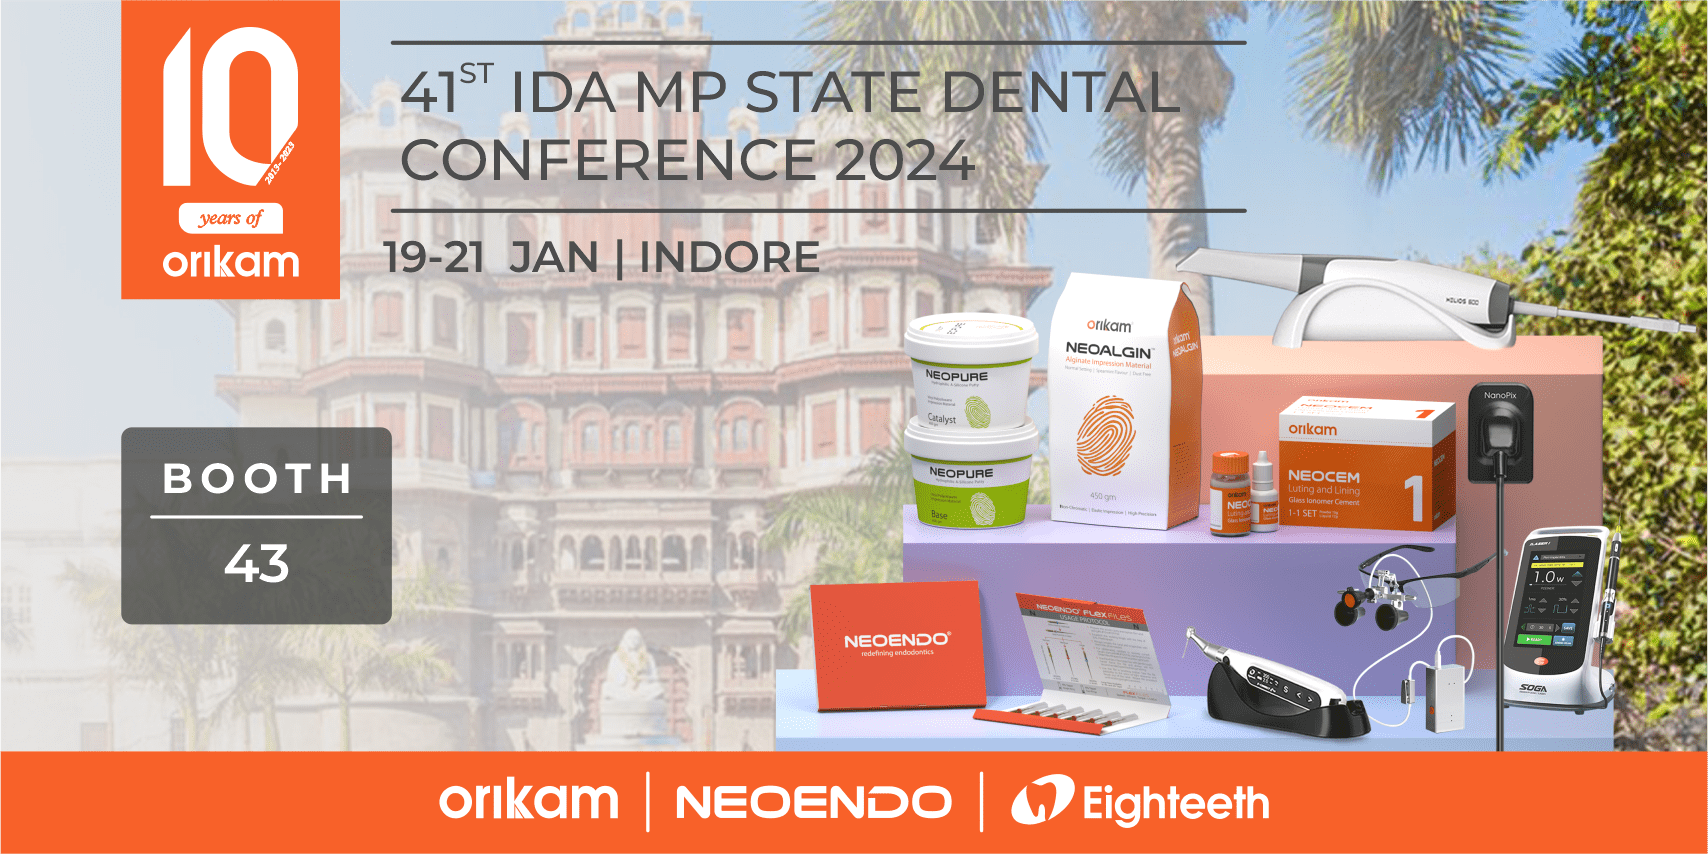 41st MP State Dental Conference